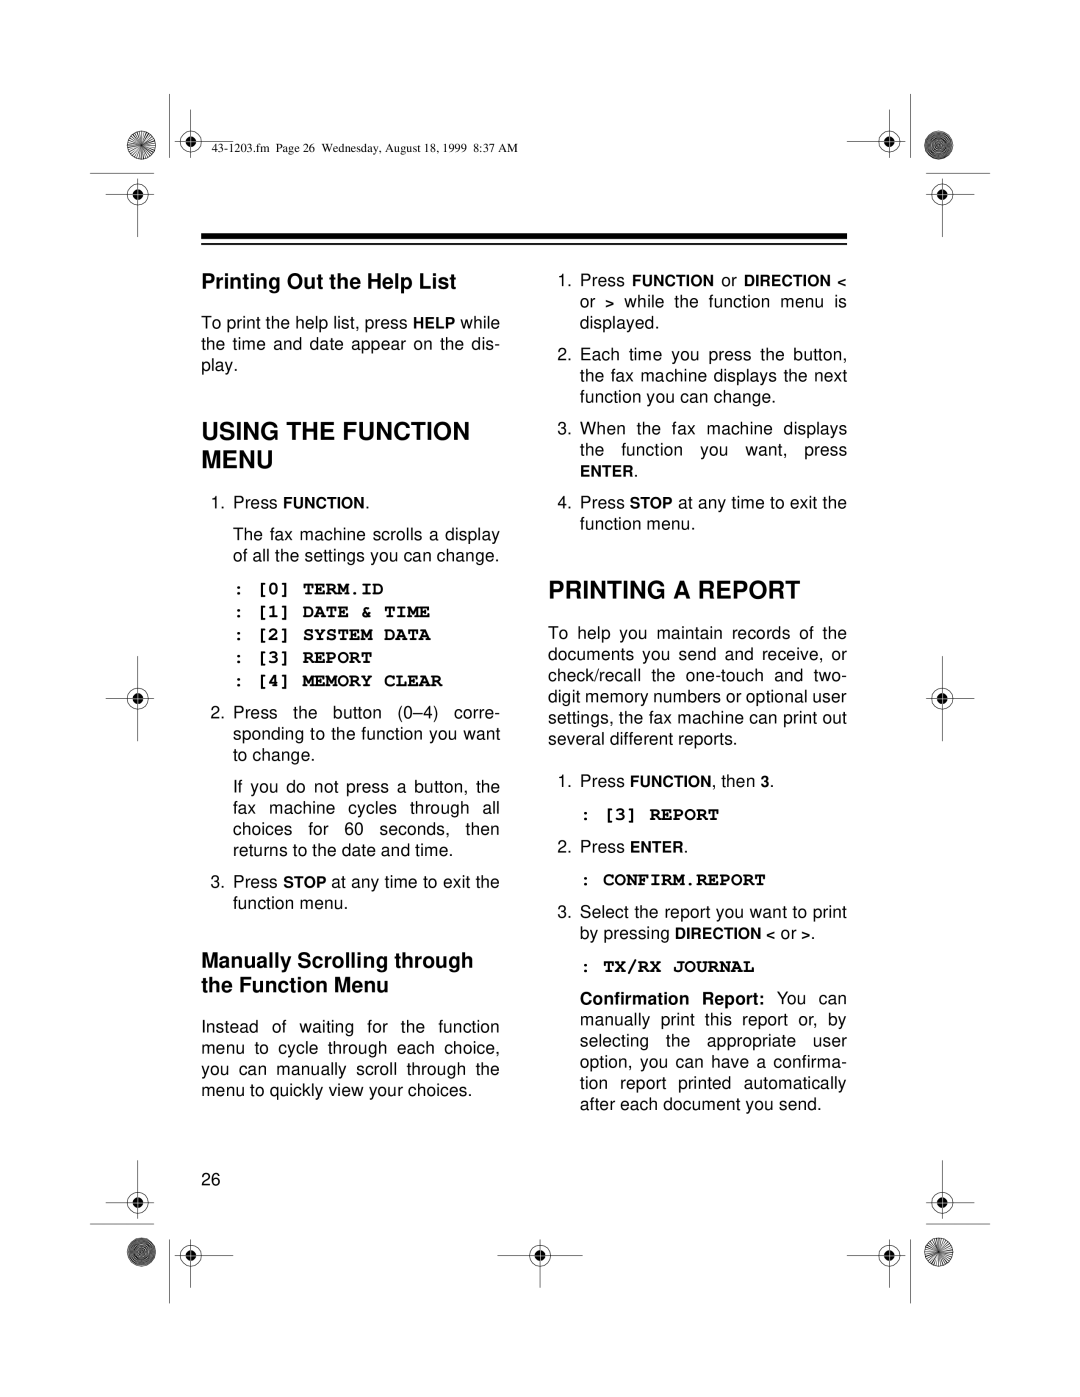 Radio Shack TFX-1031 Using The Function Menu, Printing A Report, Printing Out the Help List, Confirm.Report, Tx/Rx Journal 